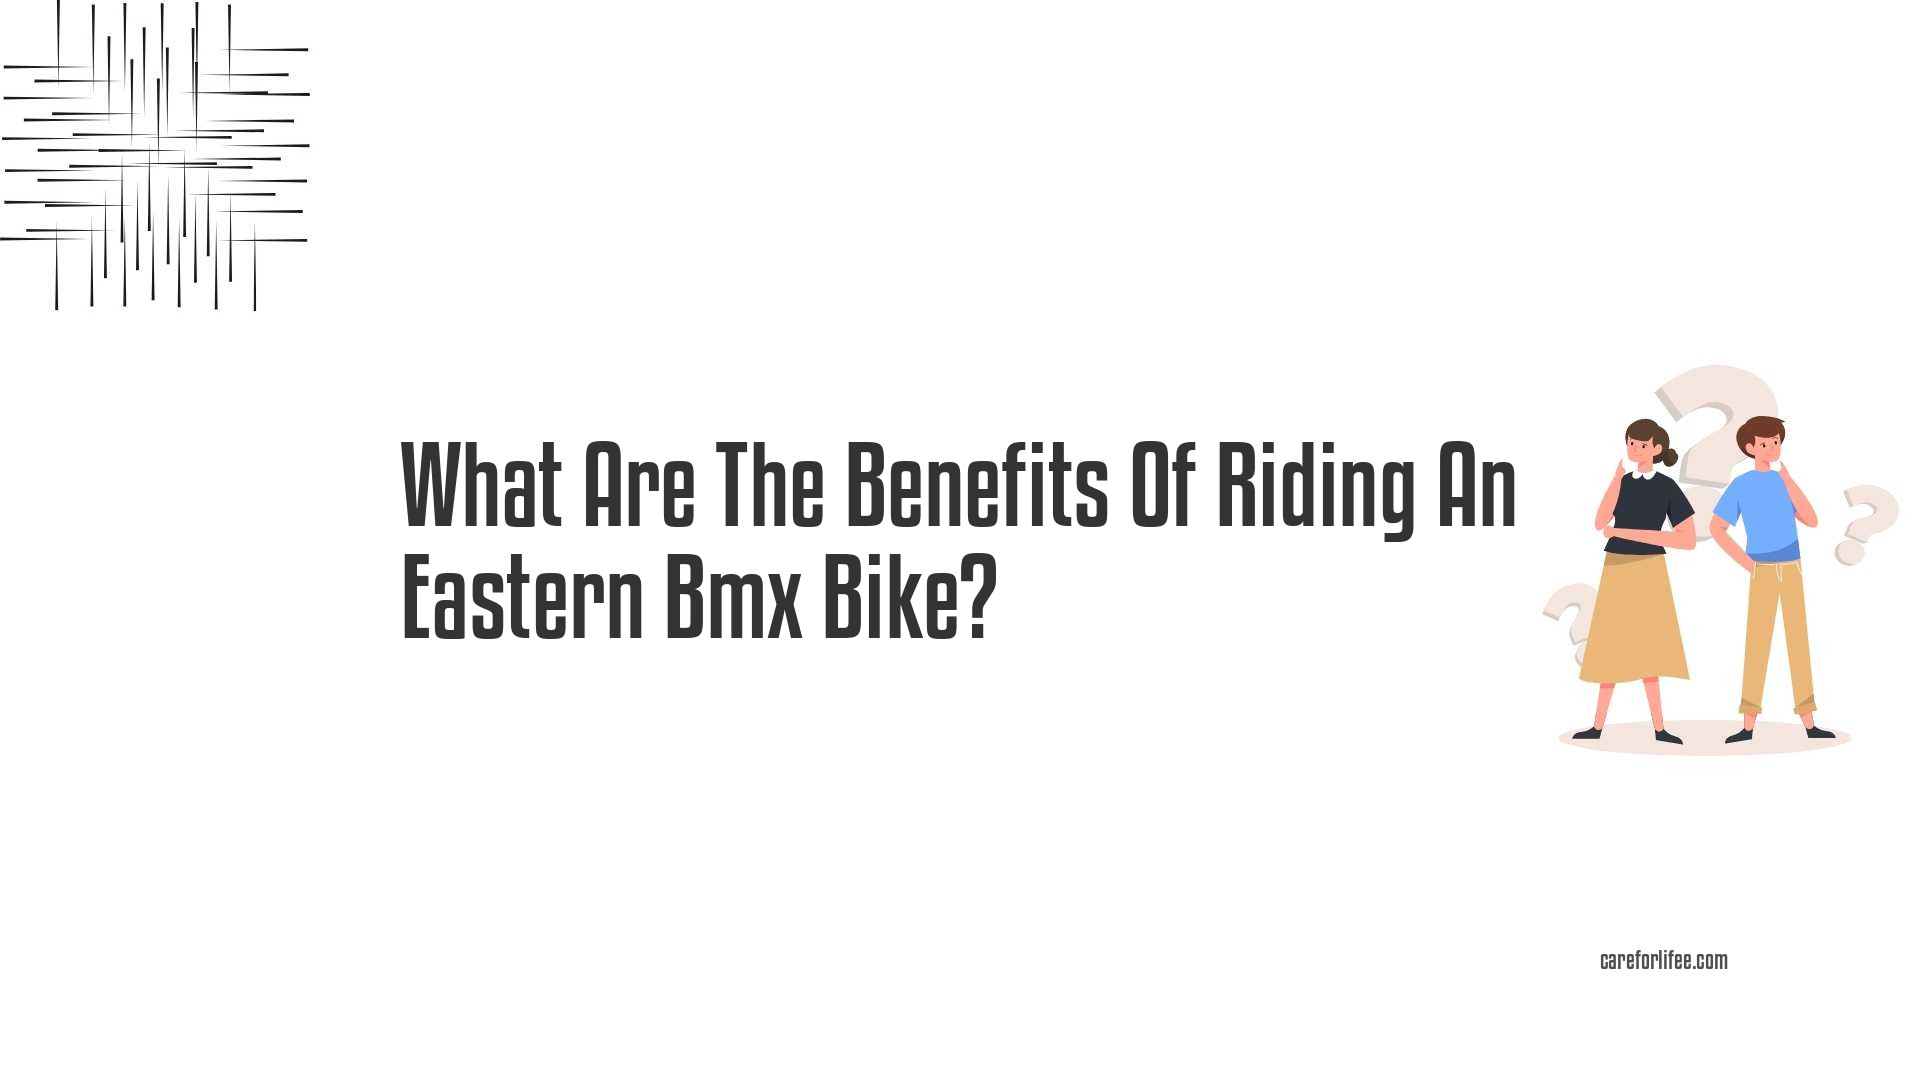 What Are The Benefits Of Riding An Eastern Bmx Bike?